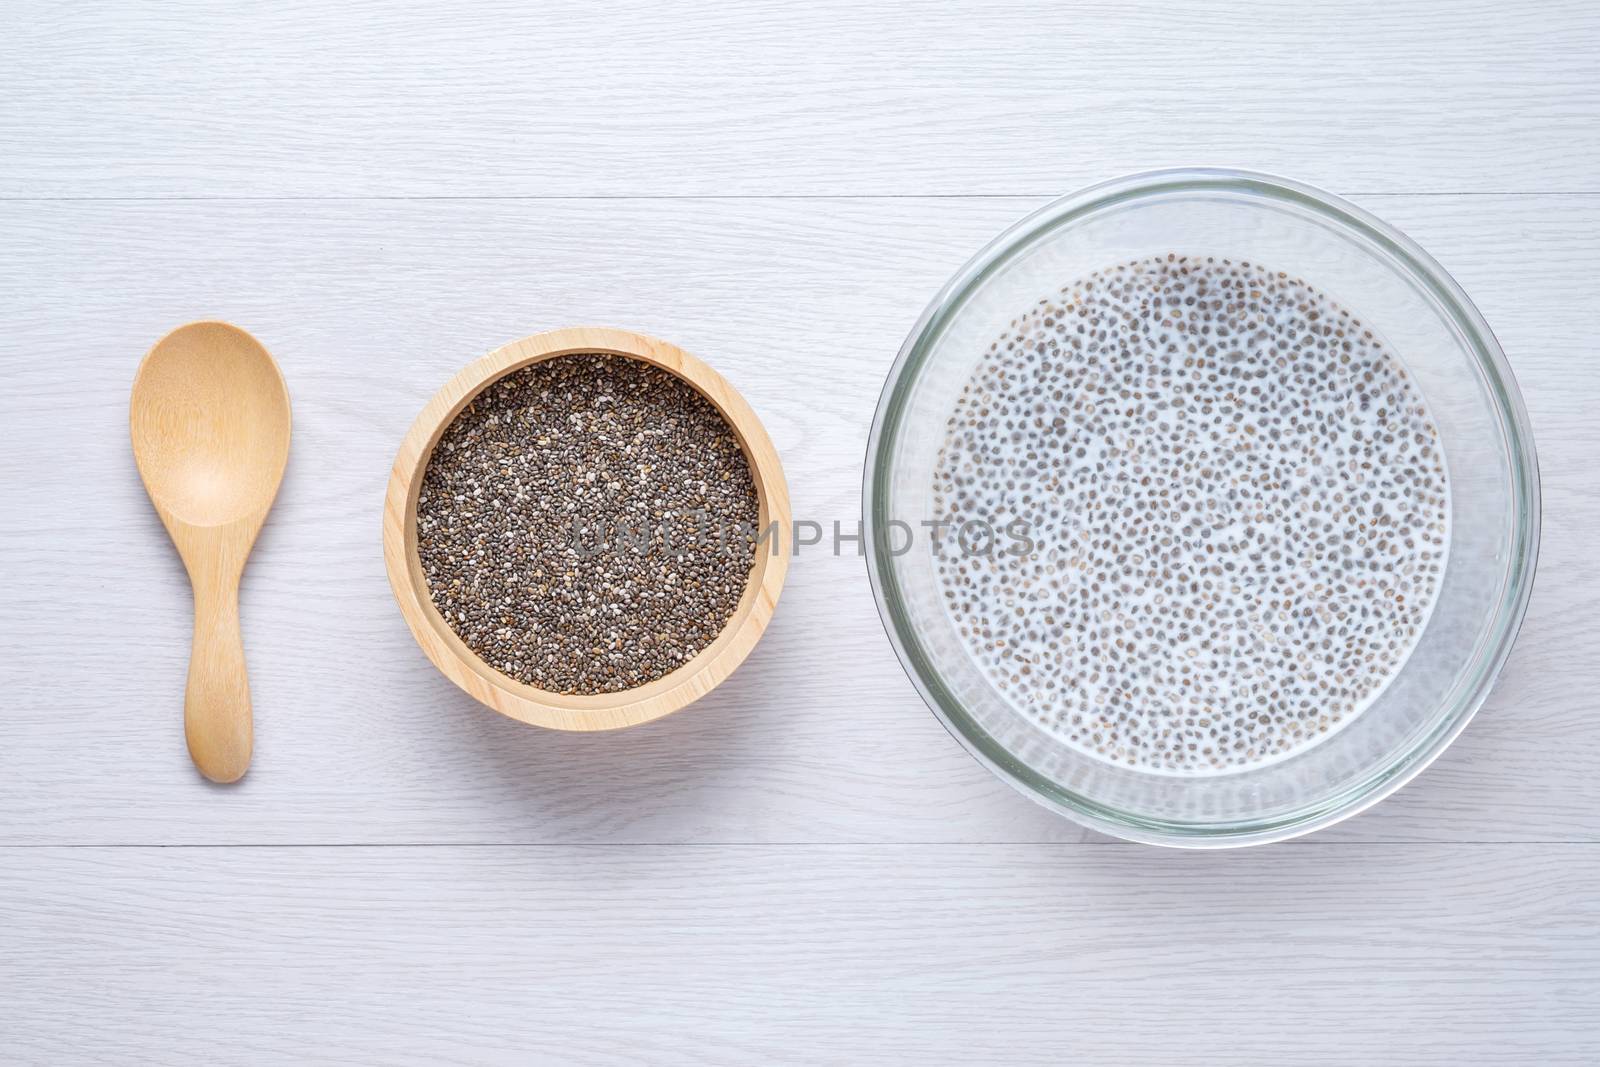 chai seed with milk in grass bowl and raw seed in wooden bowl put next to wooden spoon